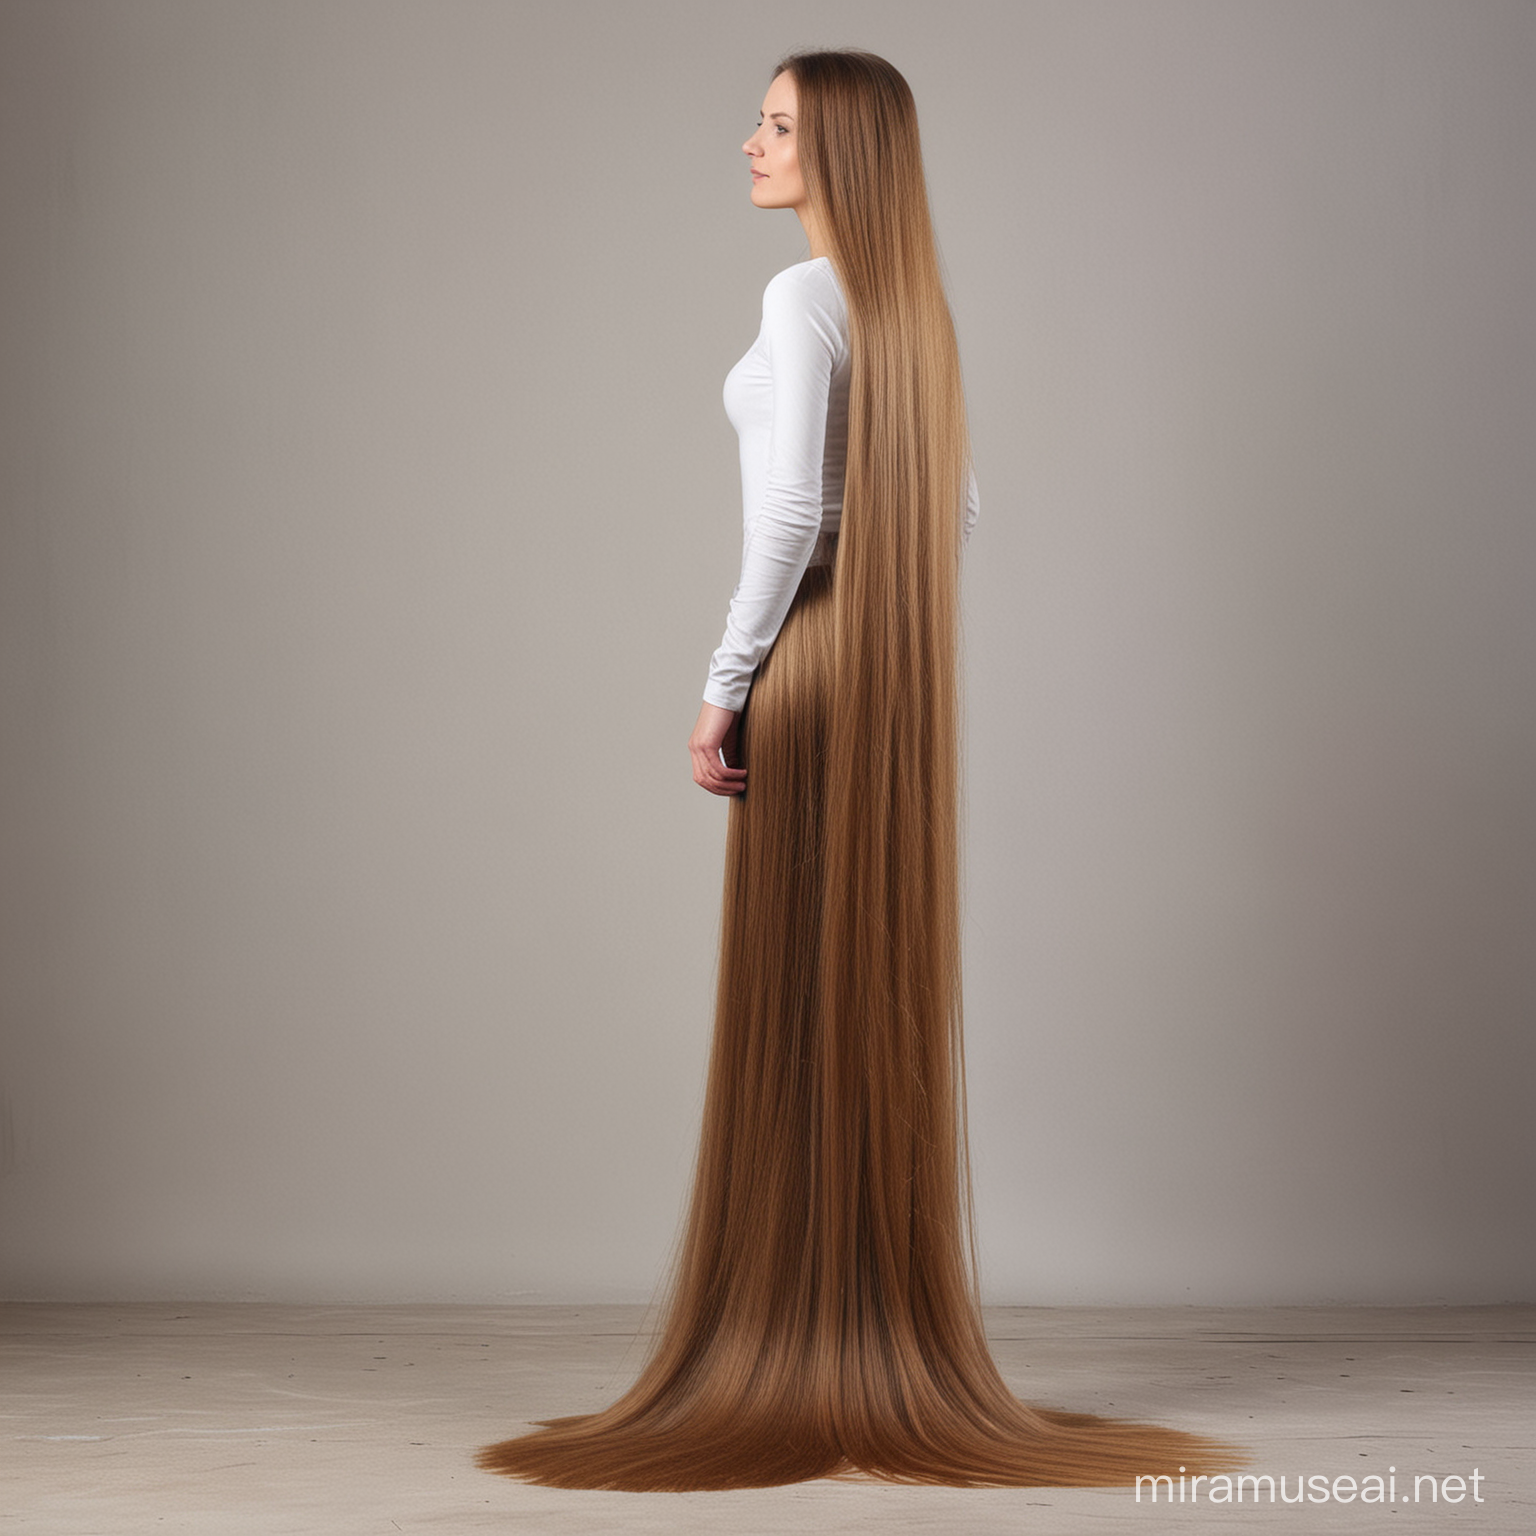 Woman with really extremely long long long hair